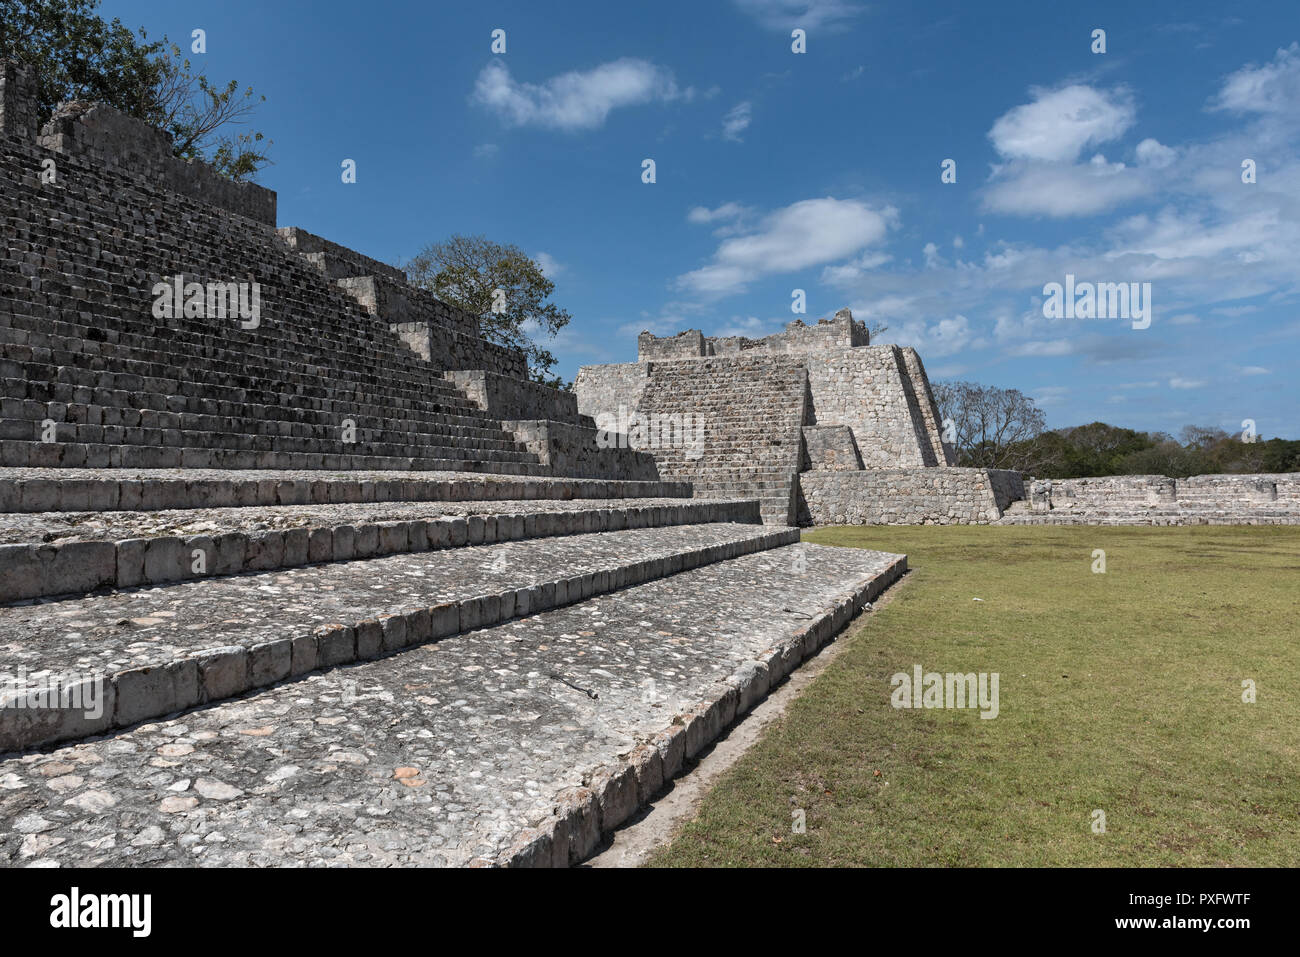 Ruins of the ancient Mayan city of Edzna near campeche, mexico Stock Photo